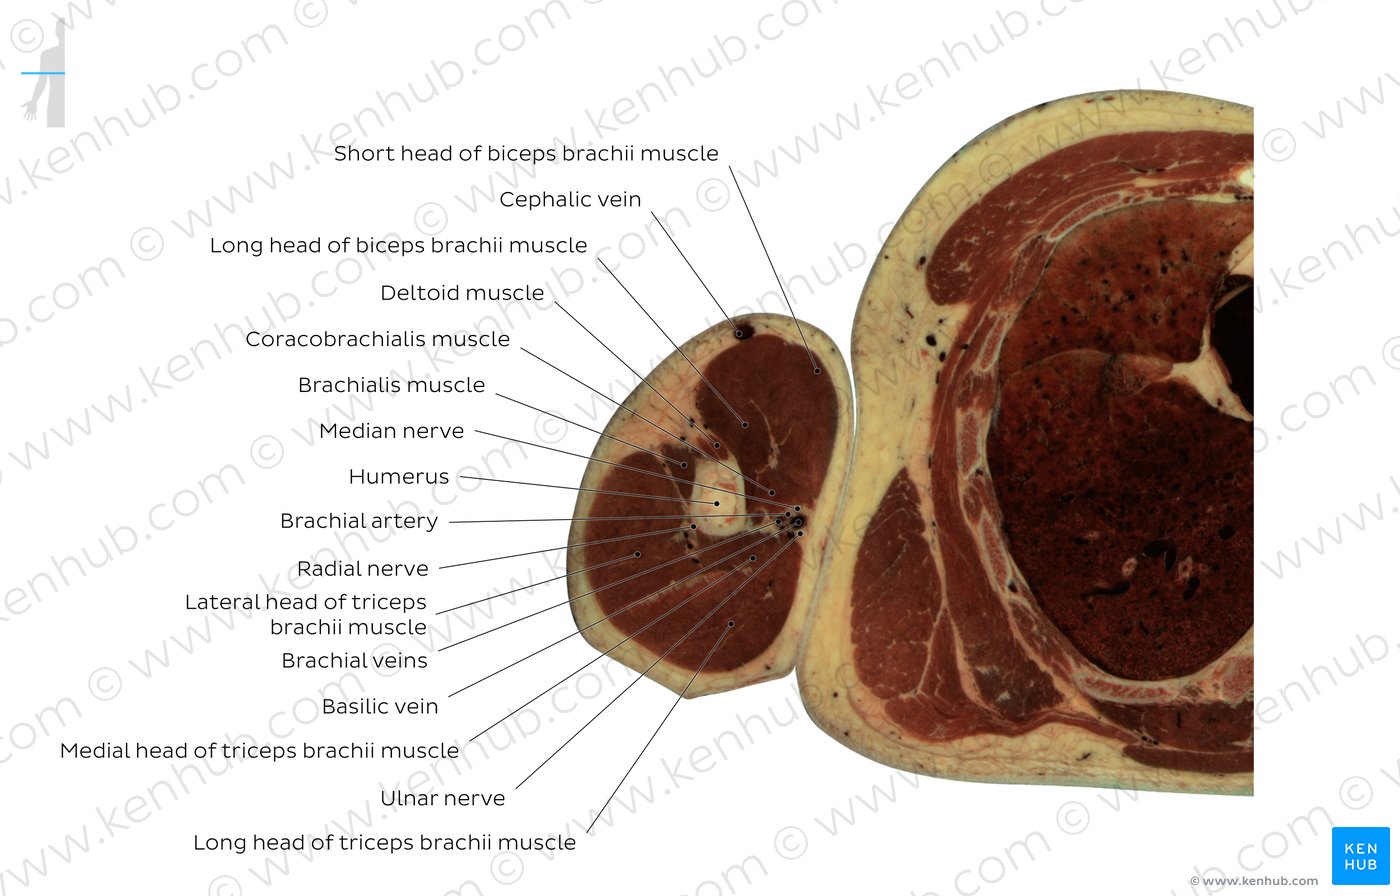 Cross section through the biceps brachii muscle: Diagram